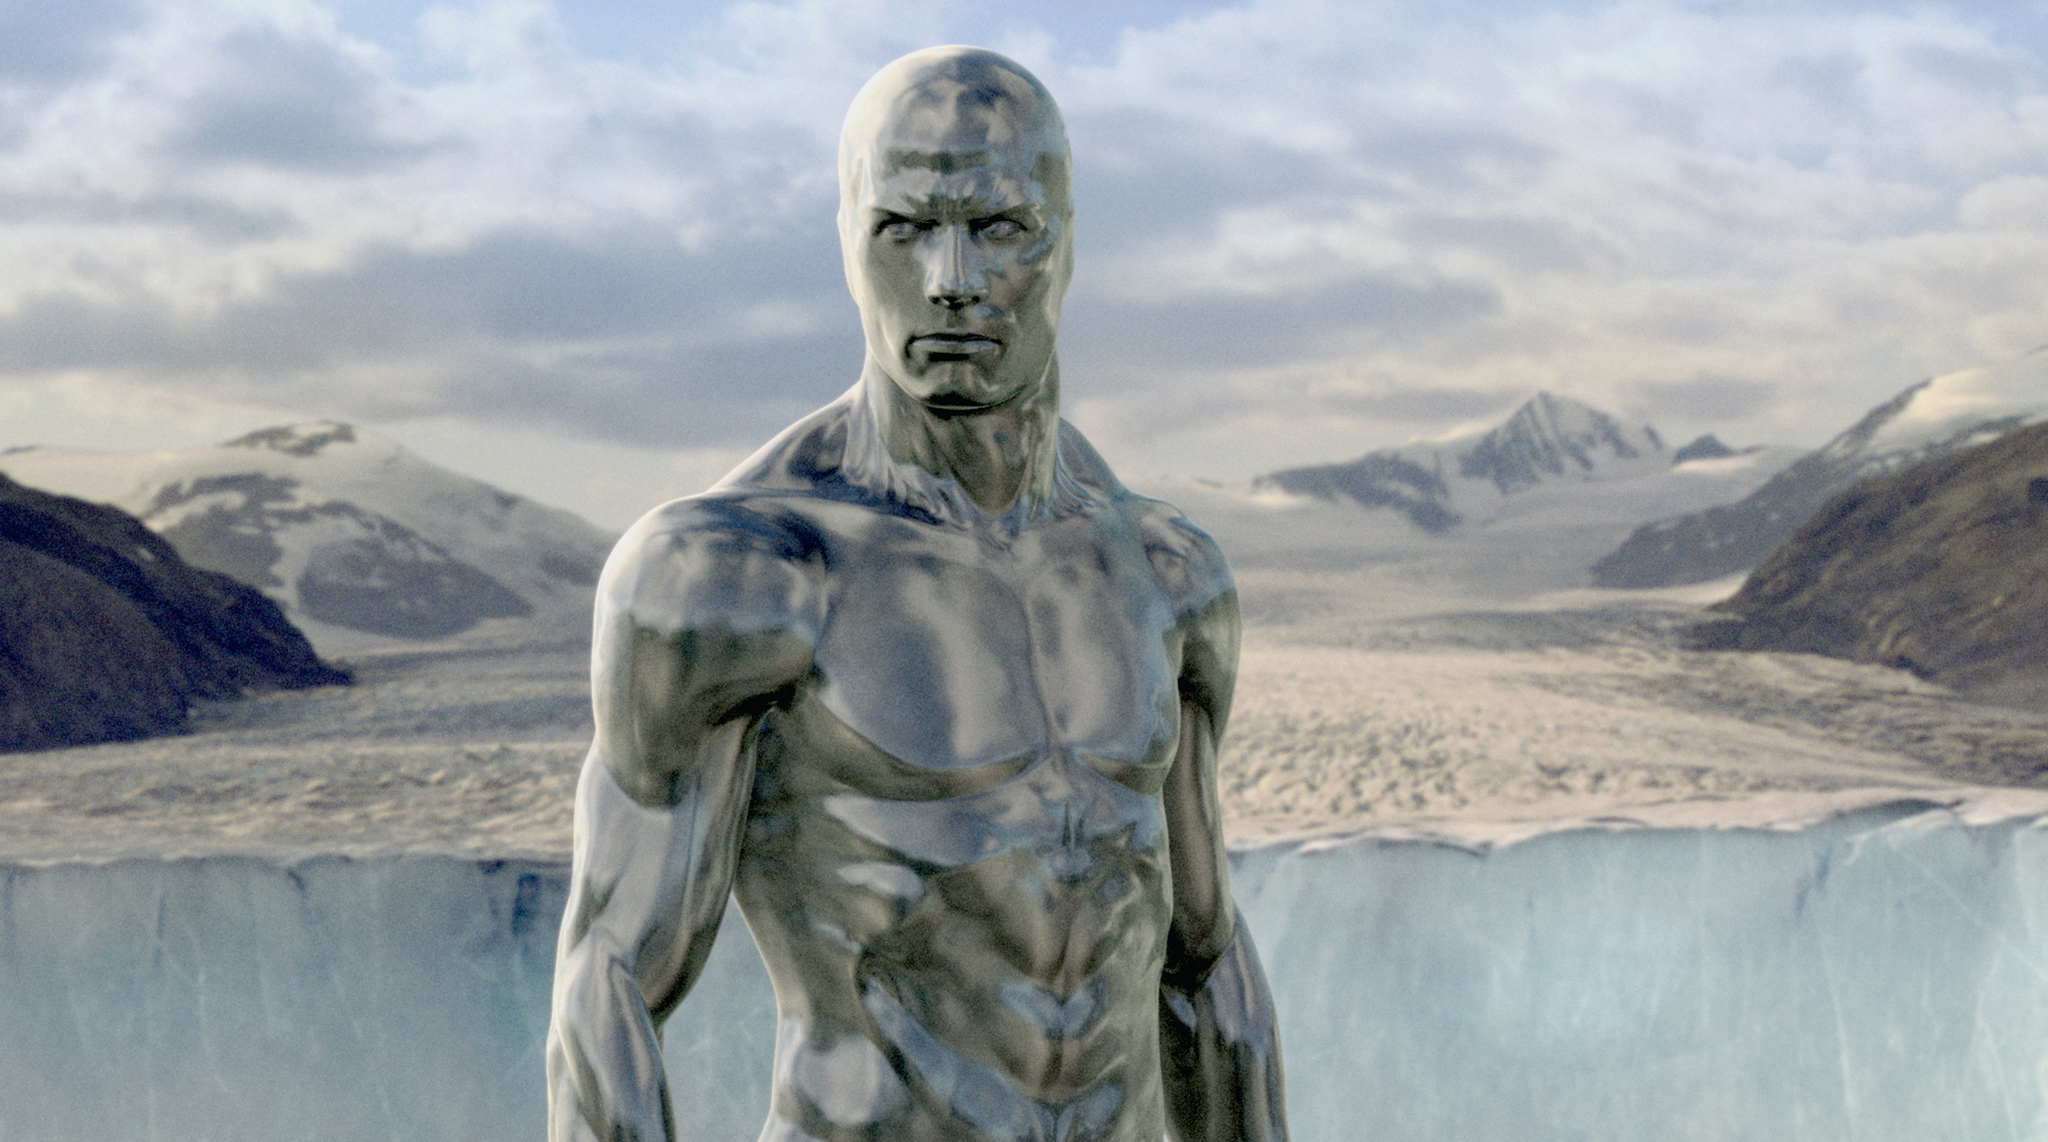 Silver Surfer in Fantastic Four: Rise of the Silver Surfer (2007).